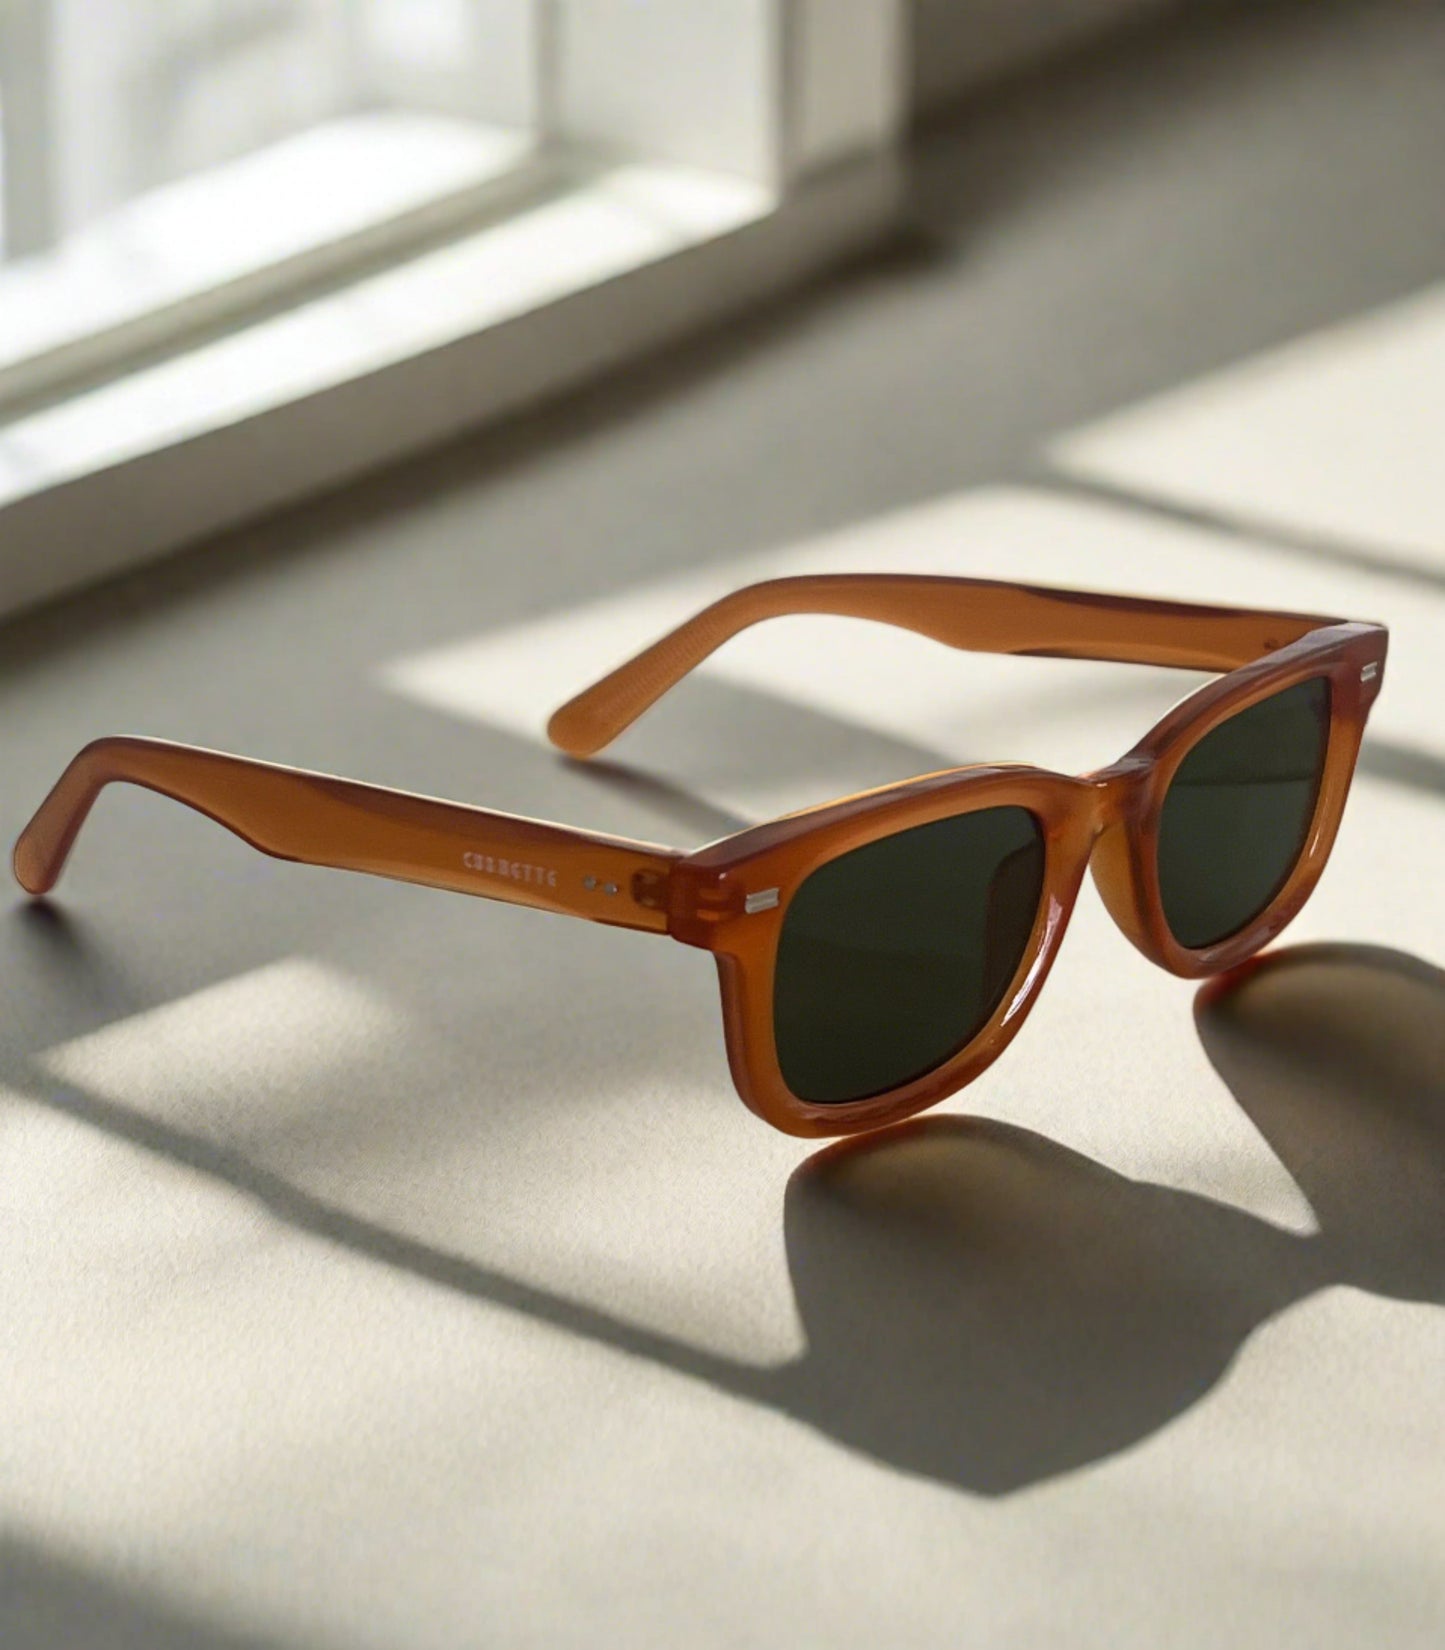 Icon sunglasses - Amber with green lens